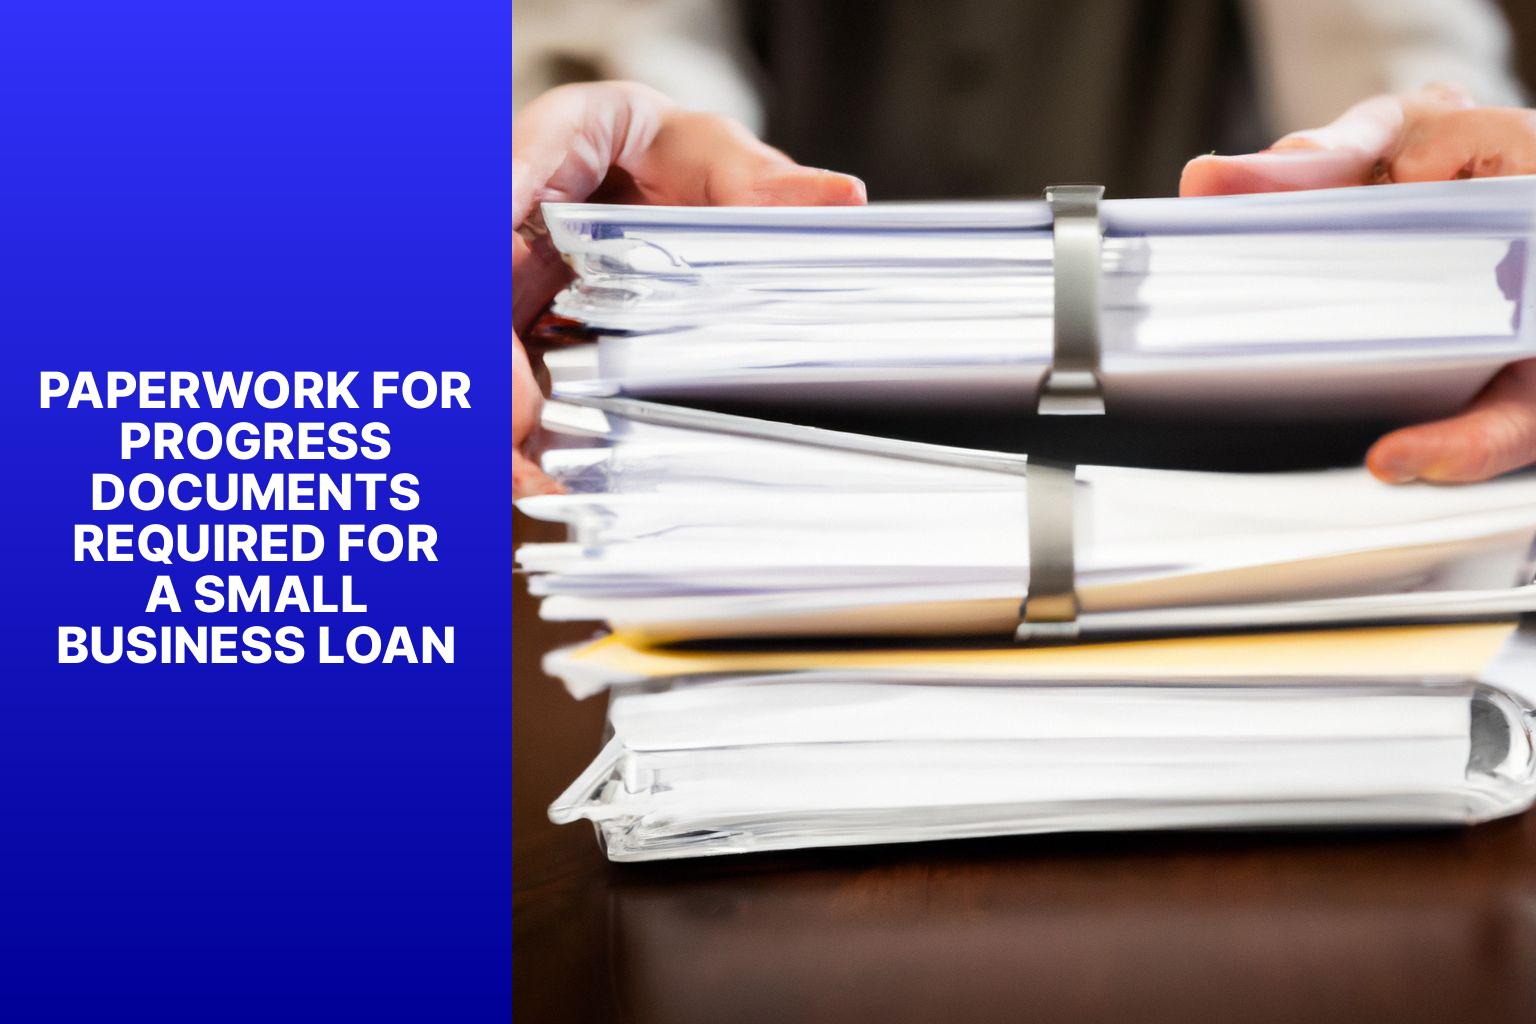 Paperwork for Progress Documents Required for a Small Business Loan